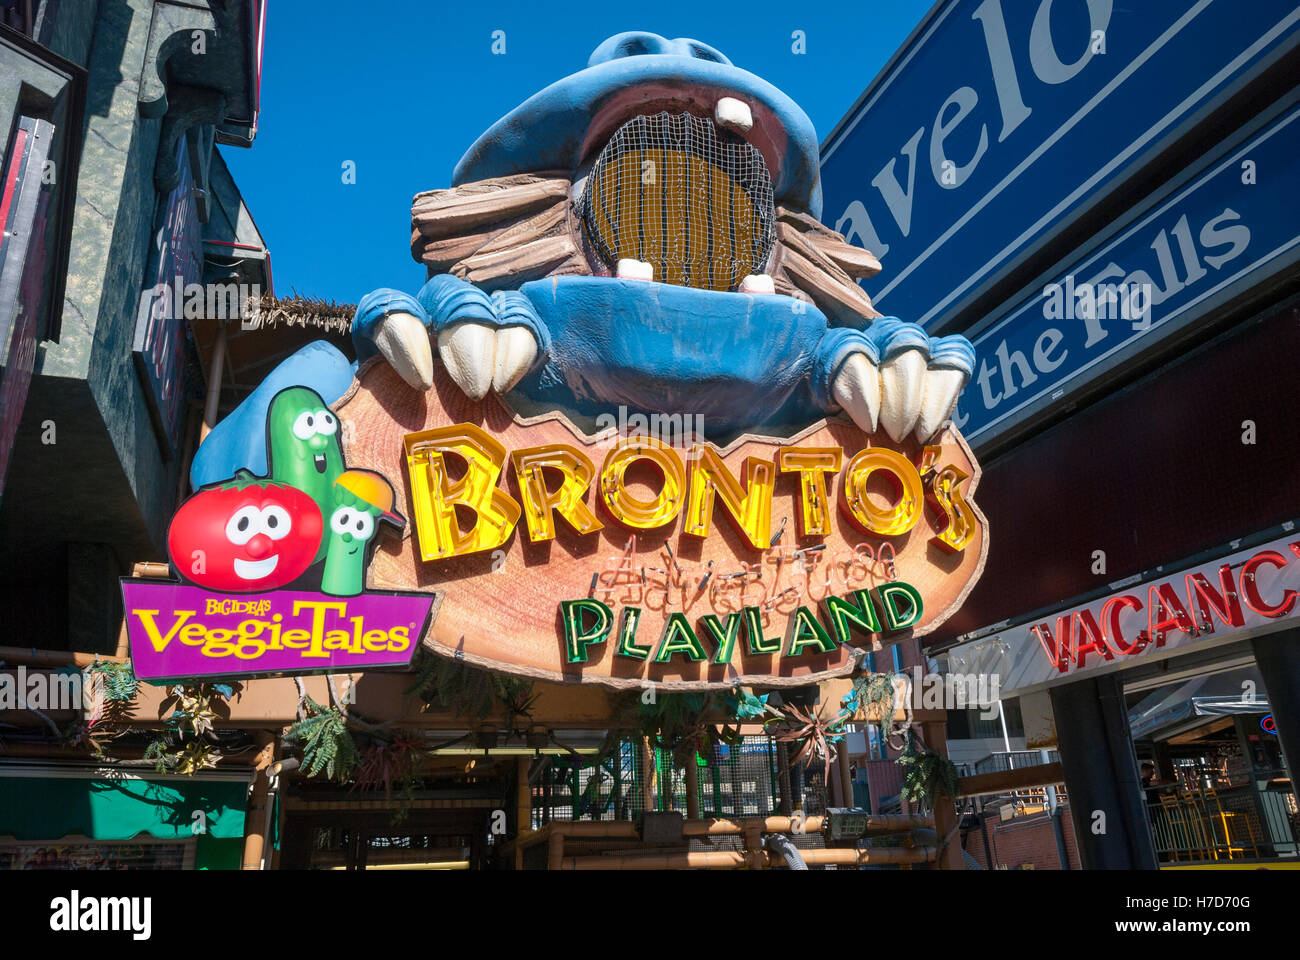 Brontos Adventure Playland a childrens attraction on Clifton hill, a street lined with tourist attractions -Niagara Falls Canada Stock Photo